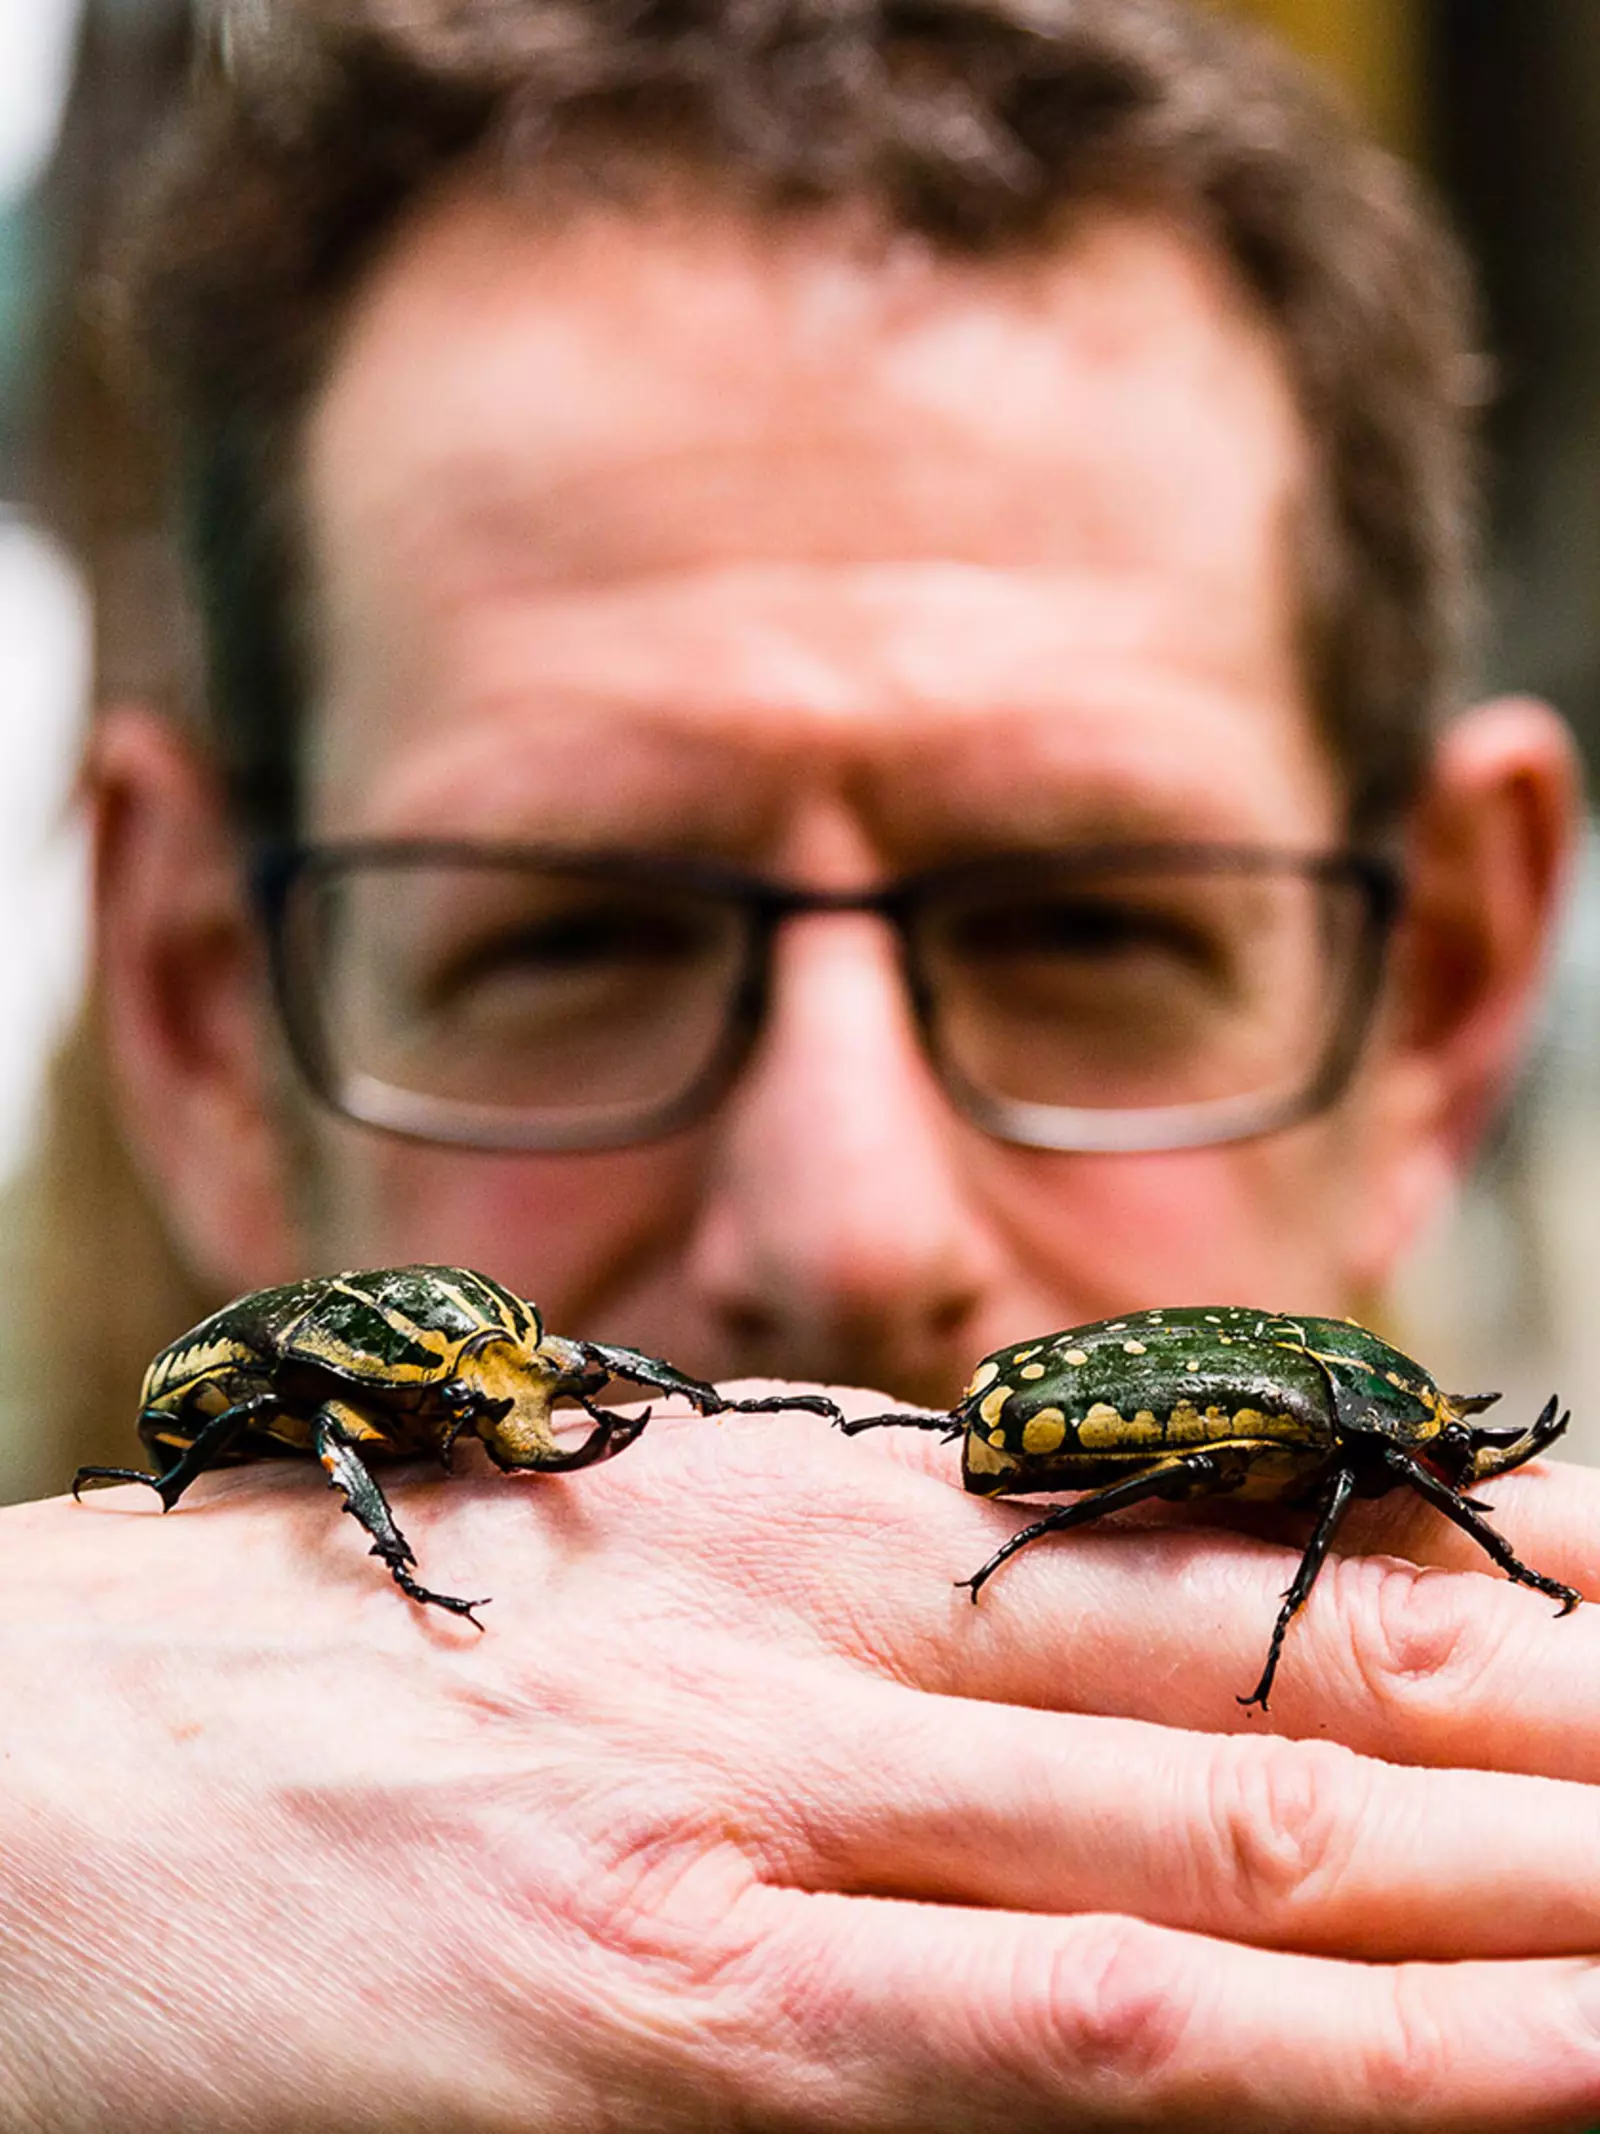 Zookeeper Dave Clarke with flower beetles on his hand